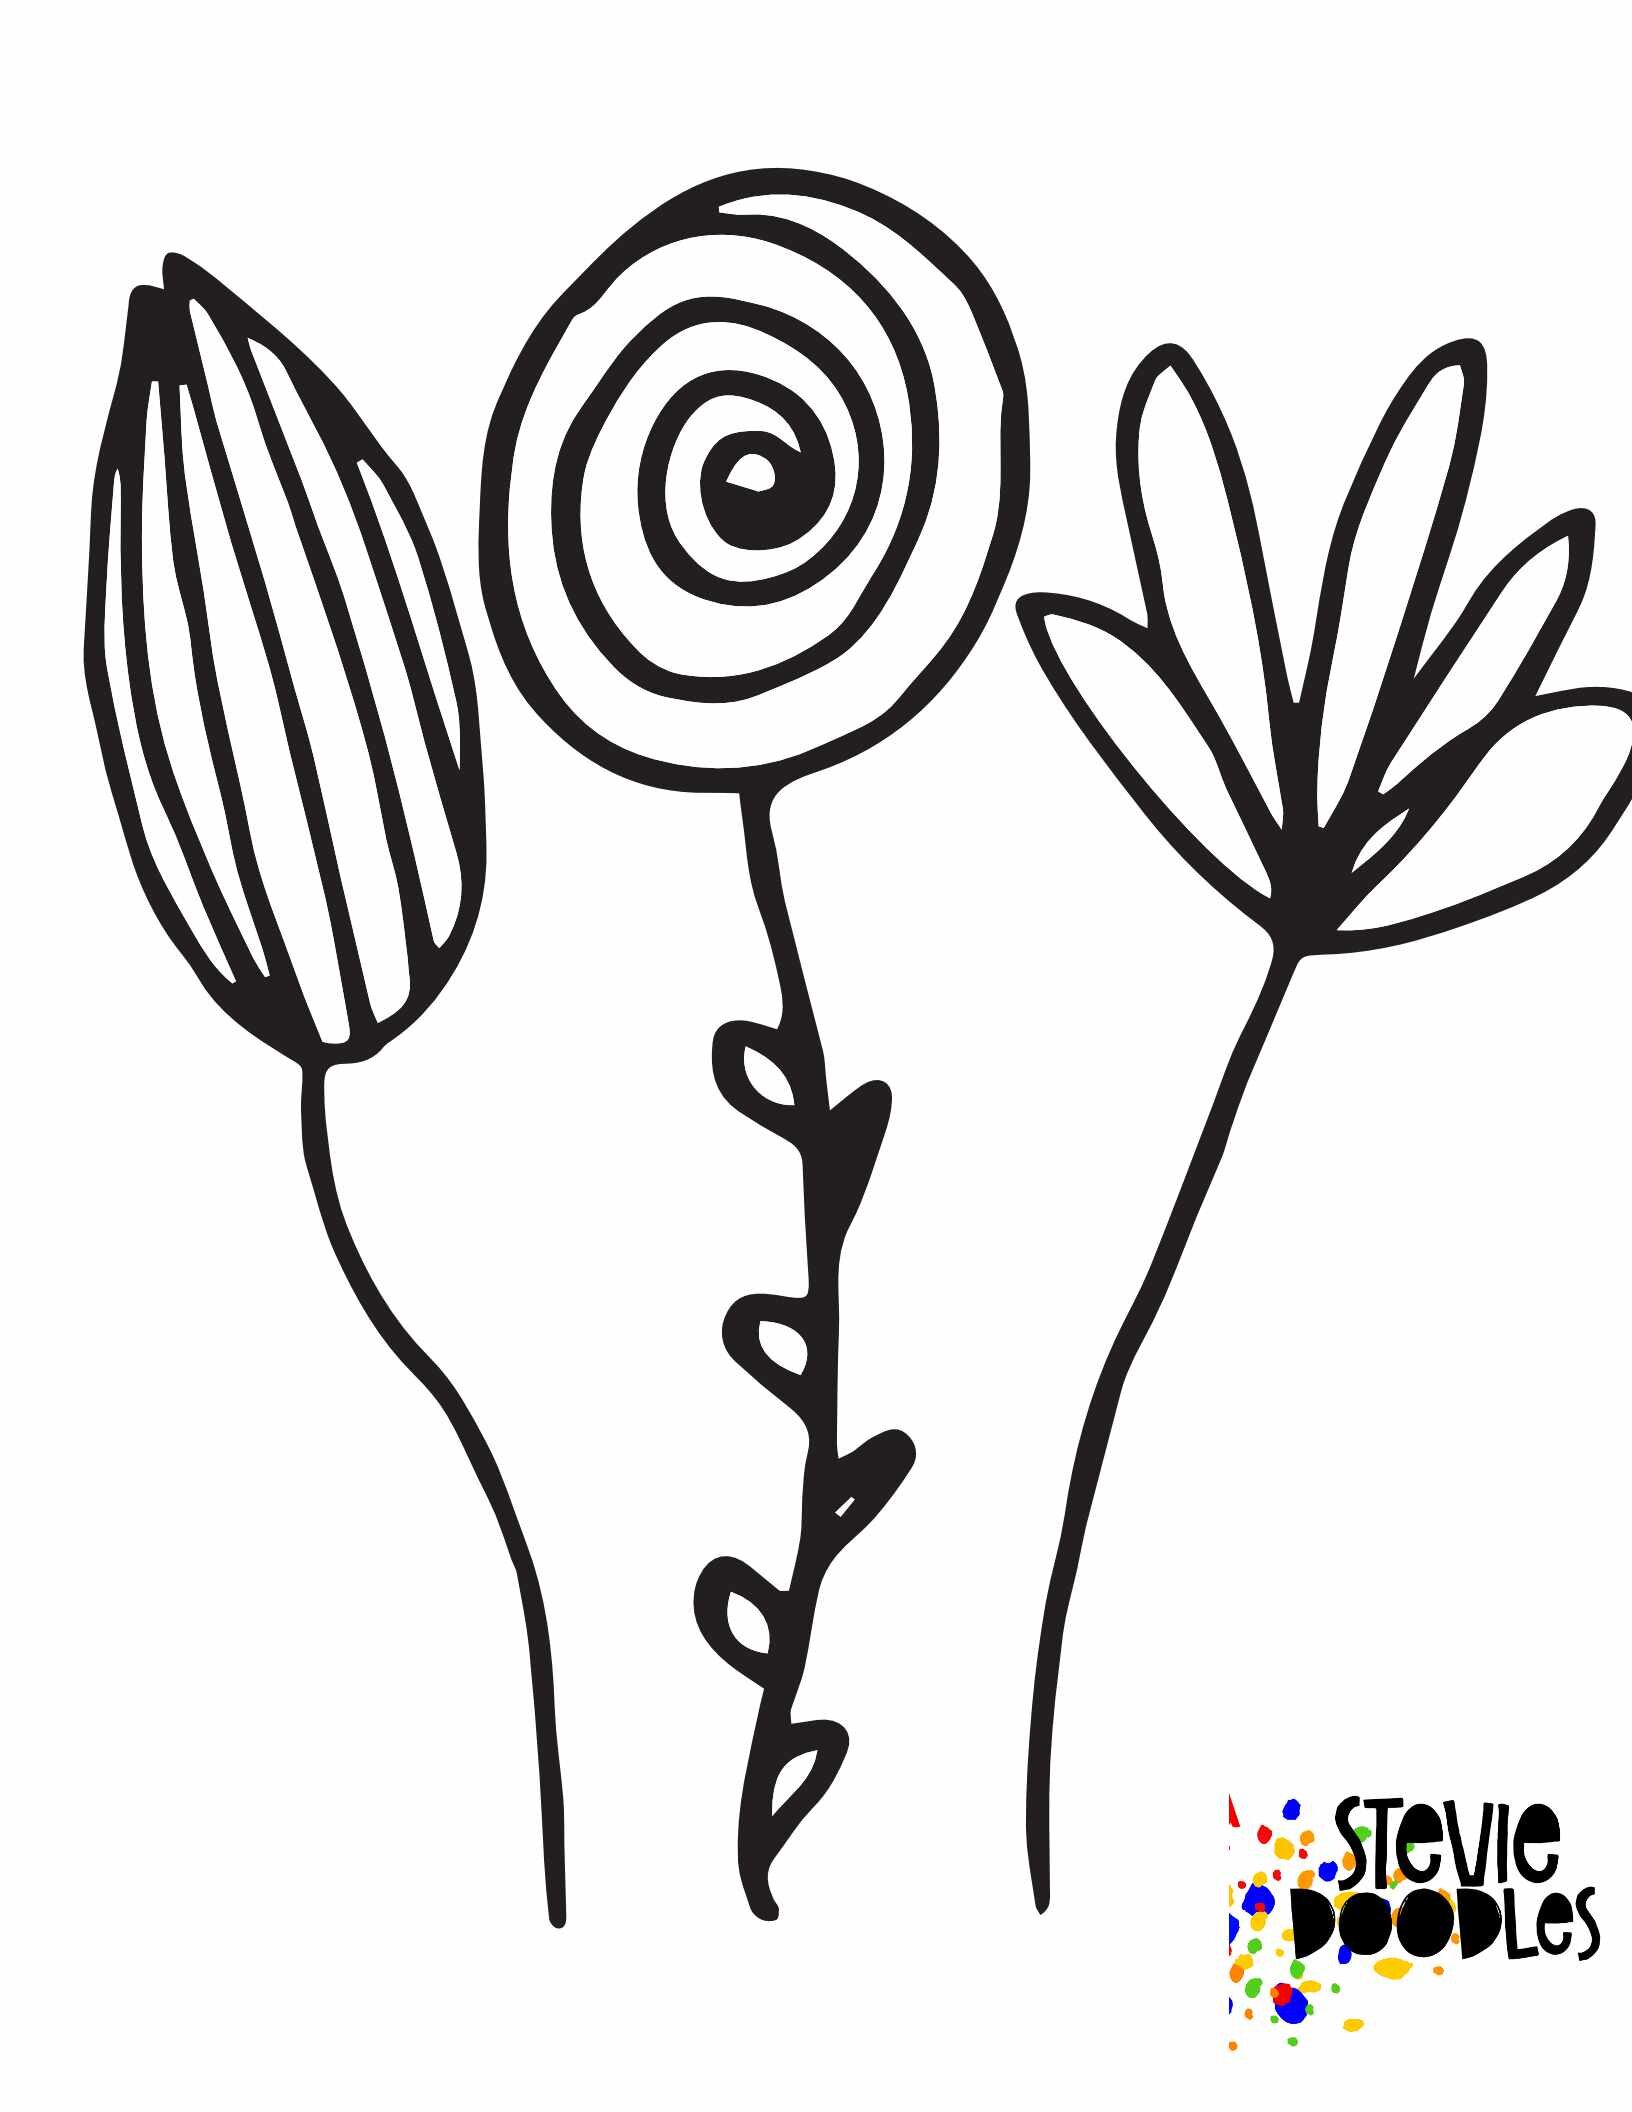 10 Free Simple Flower Coloring Pages For Kids Over 1000 Free Coloring Pages